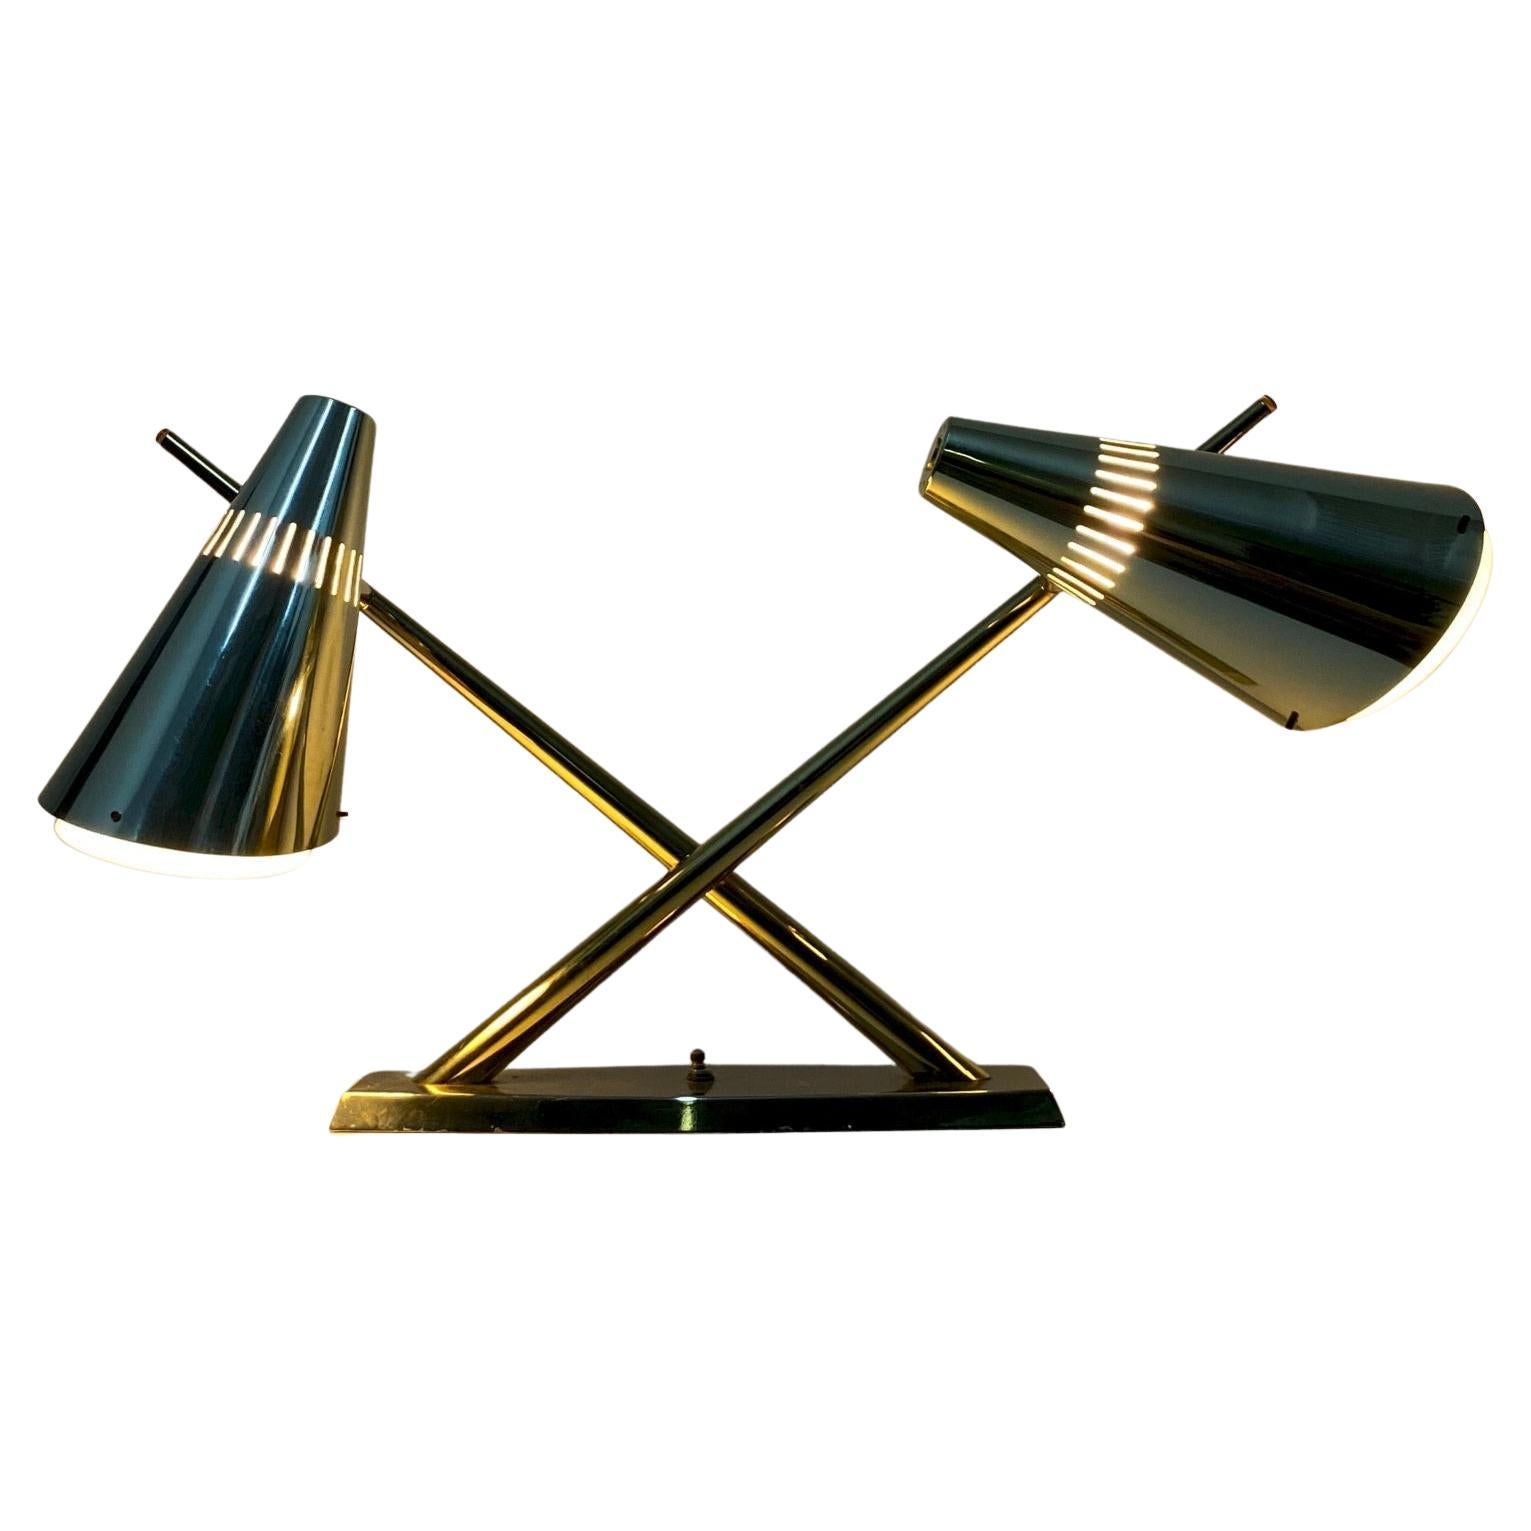 Dual Cone Desk Lamp in Brass and Glass  by Laurel Lamos, circa 1960s